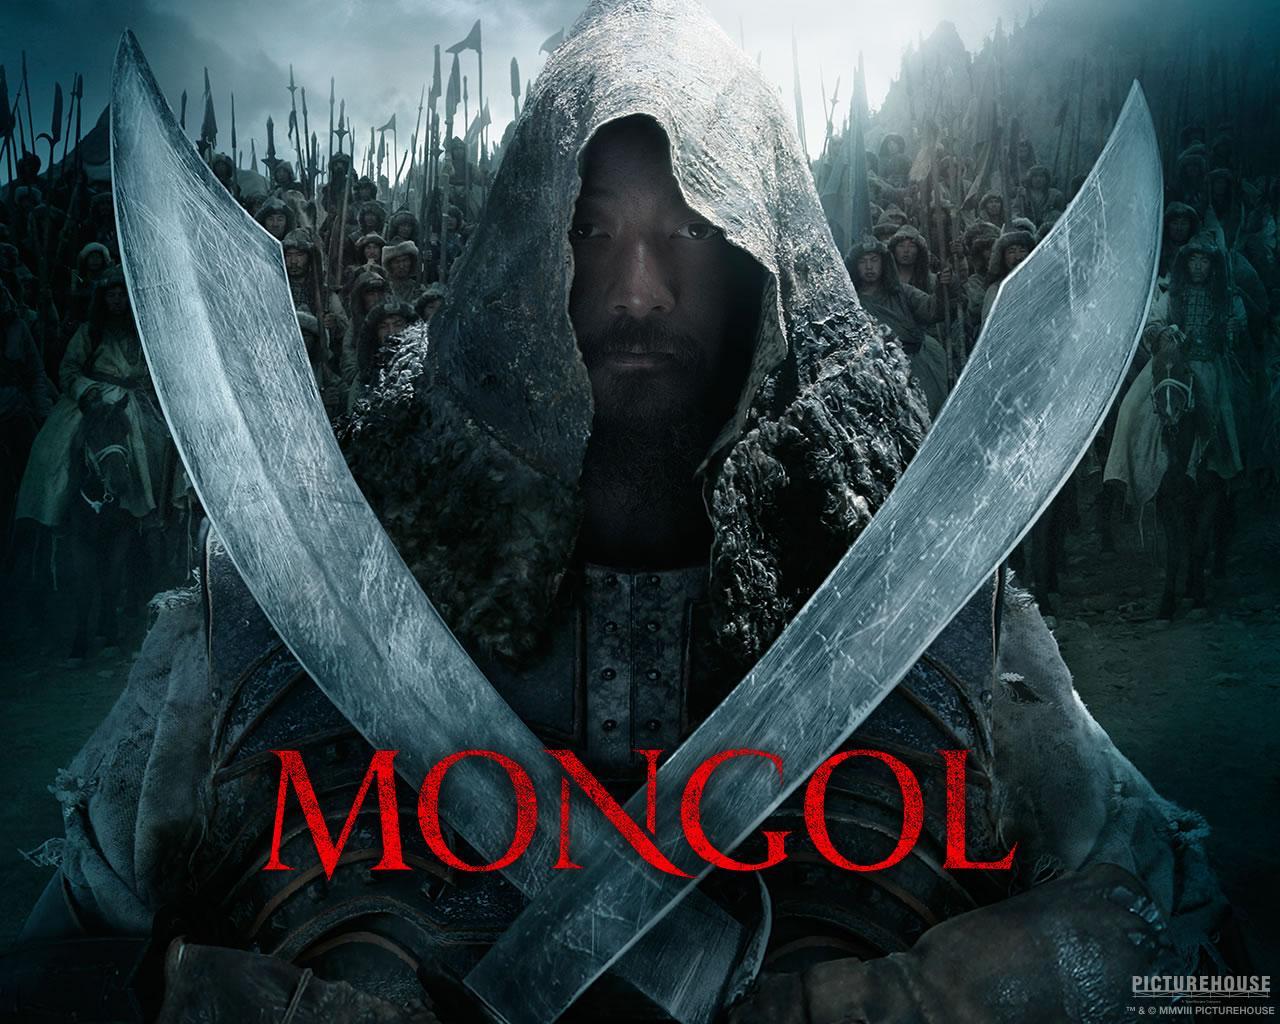 Image Gallery For Mongol The Early Years Of Genghis Khan